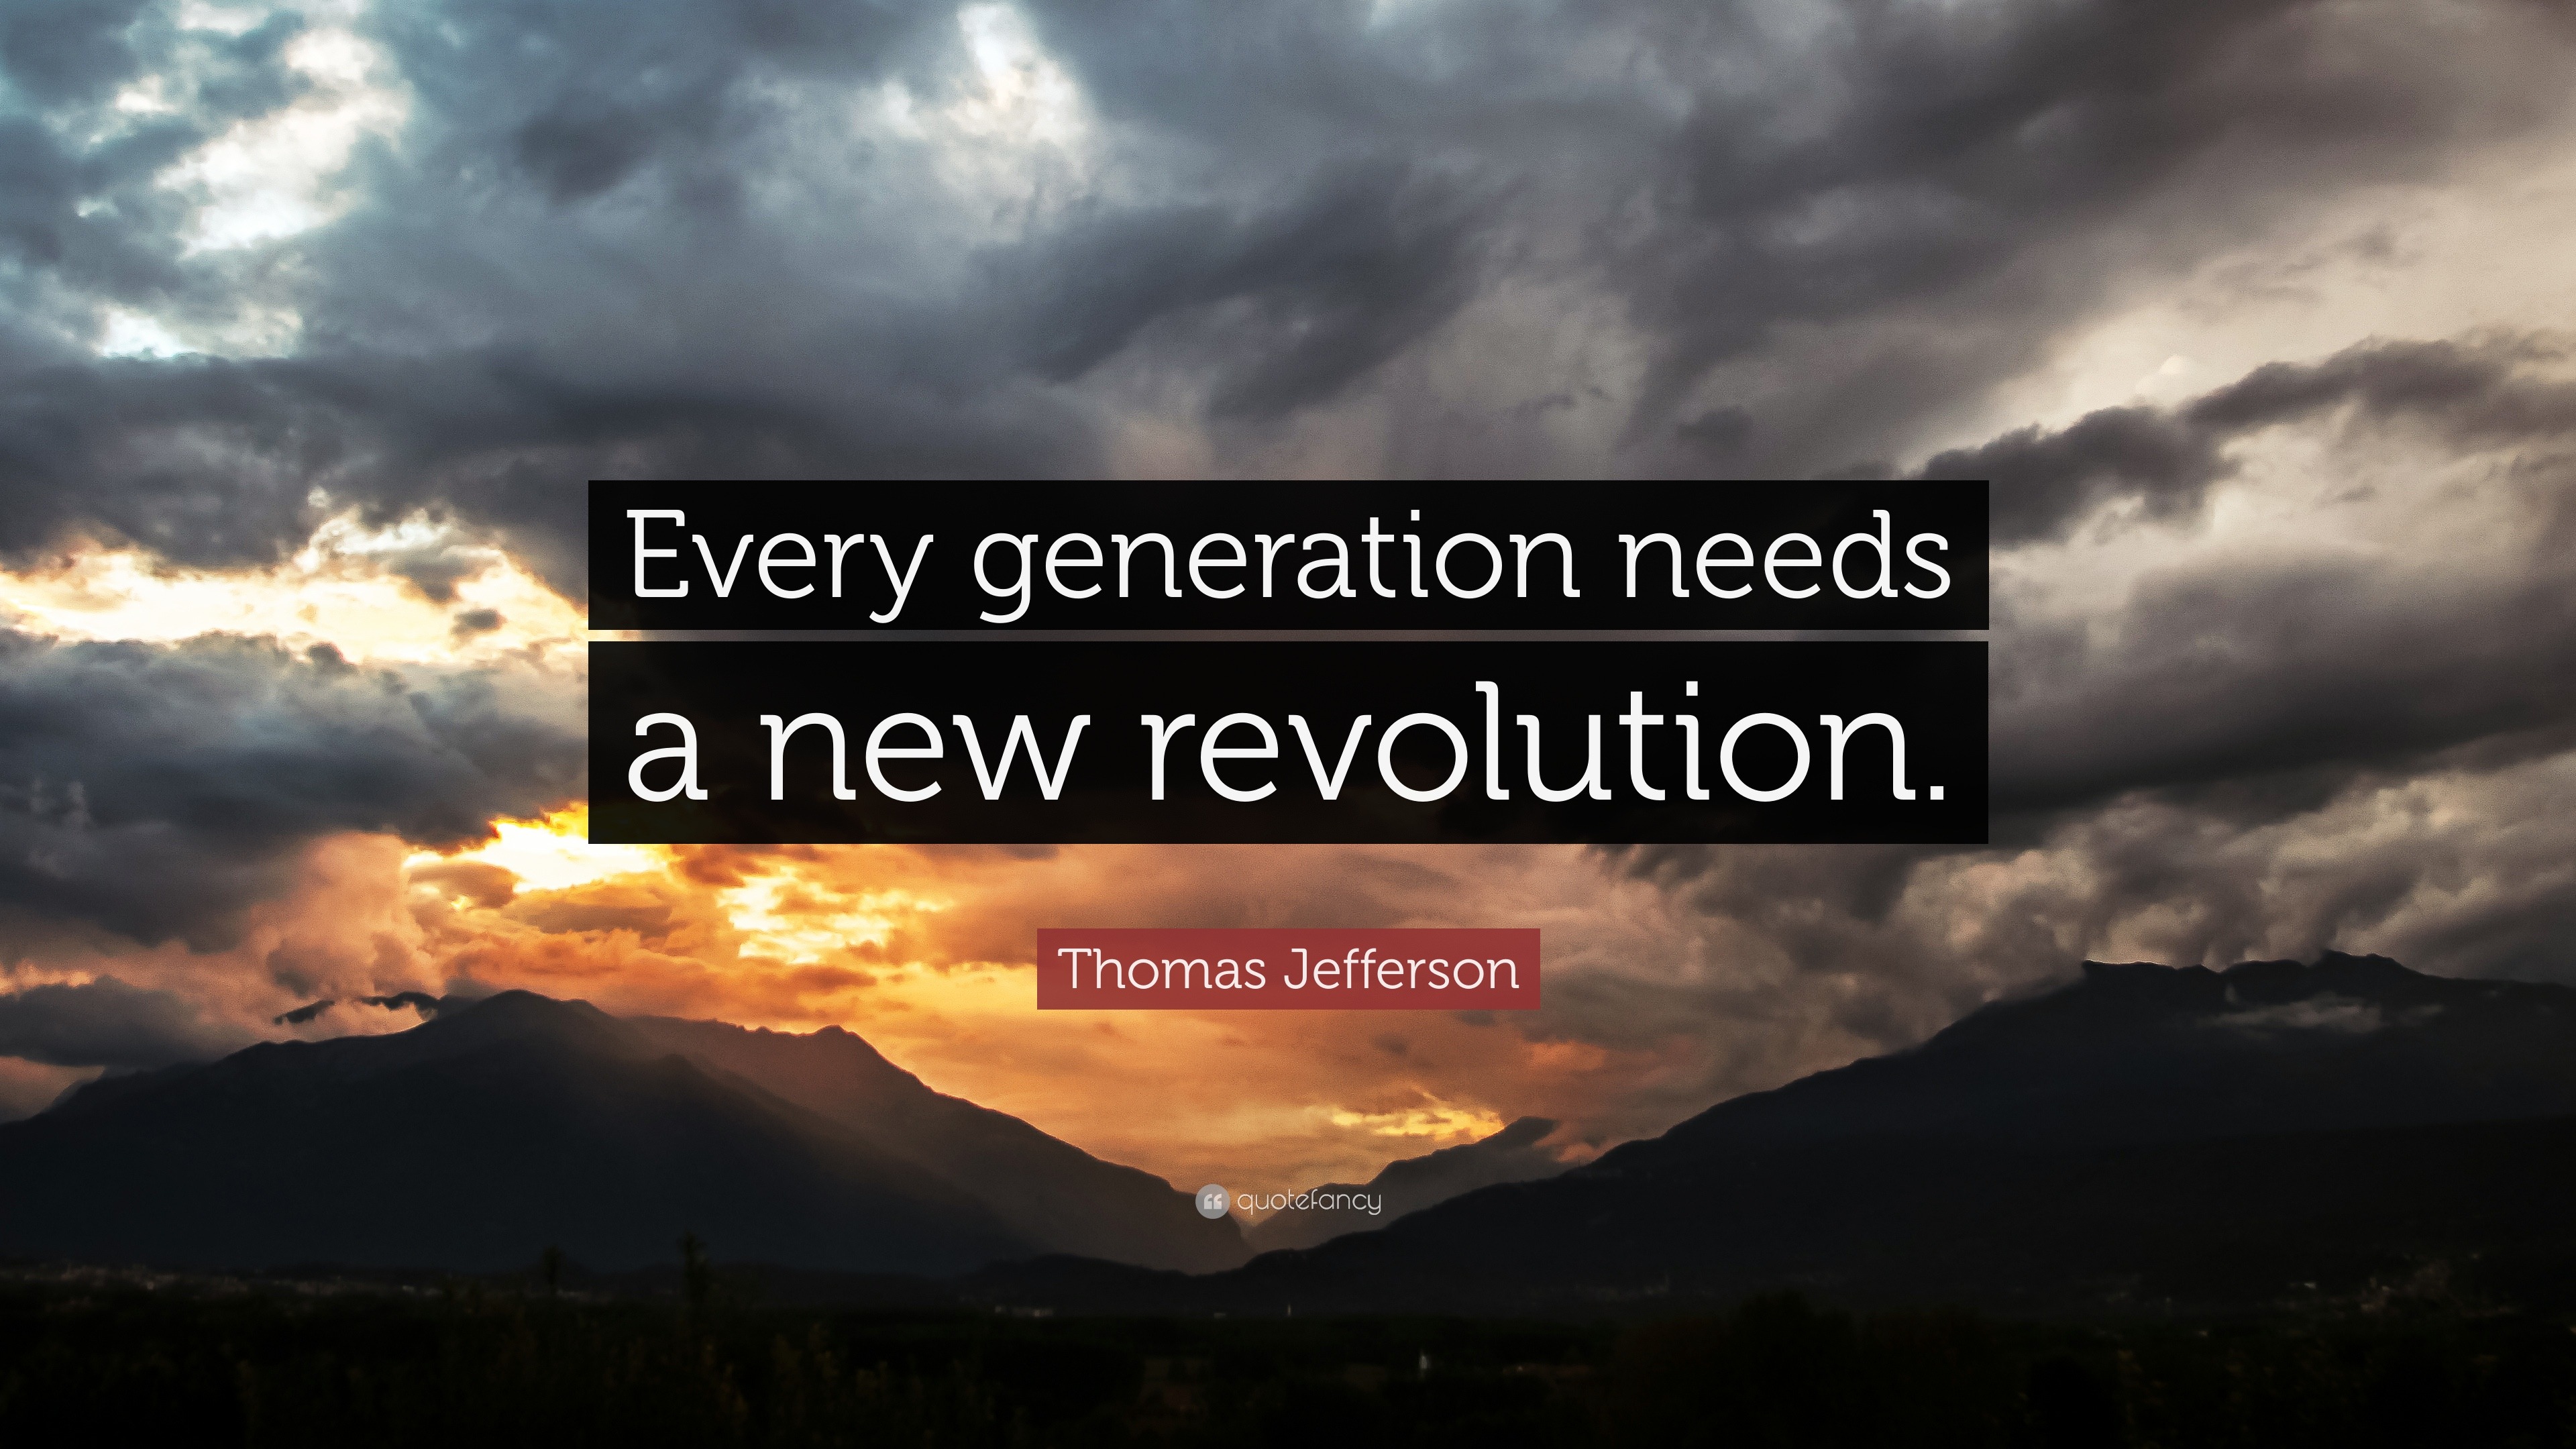 Thomas Jefferson Quotes (100 wallpapers) - Quotefancy3840 x 2160